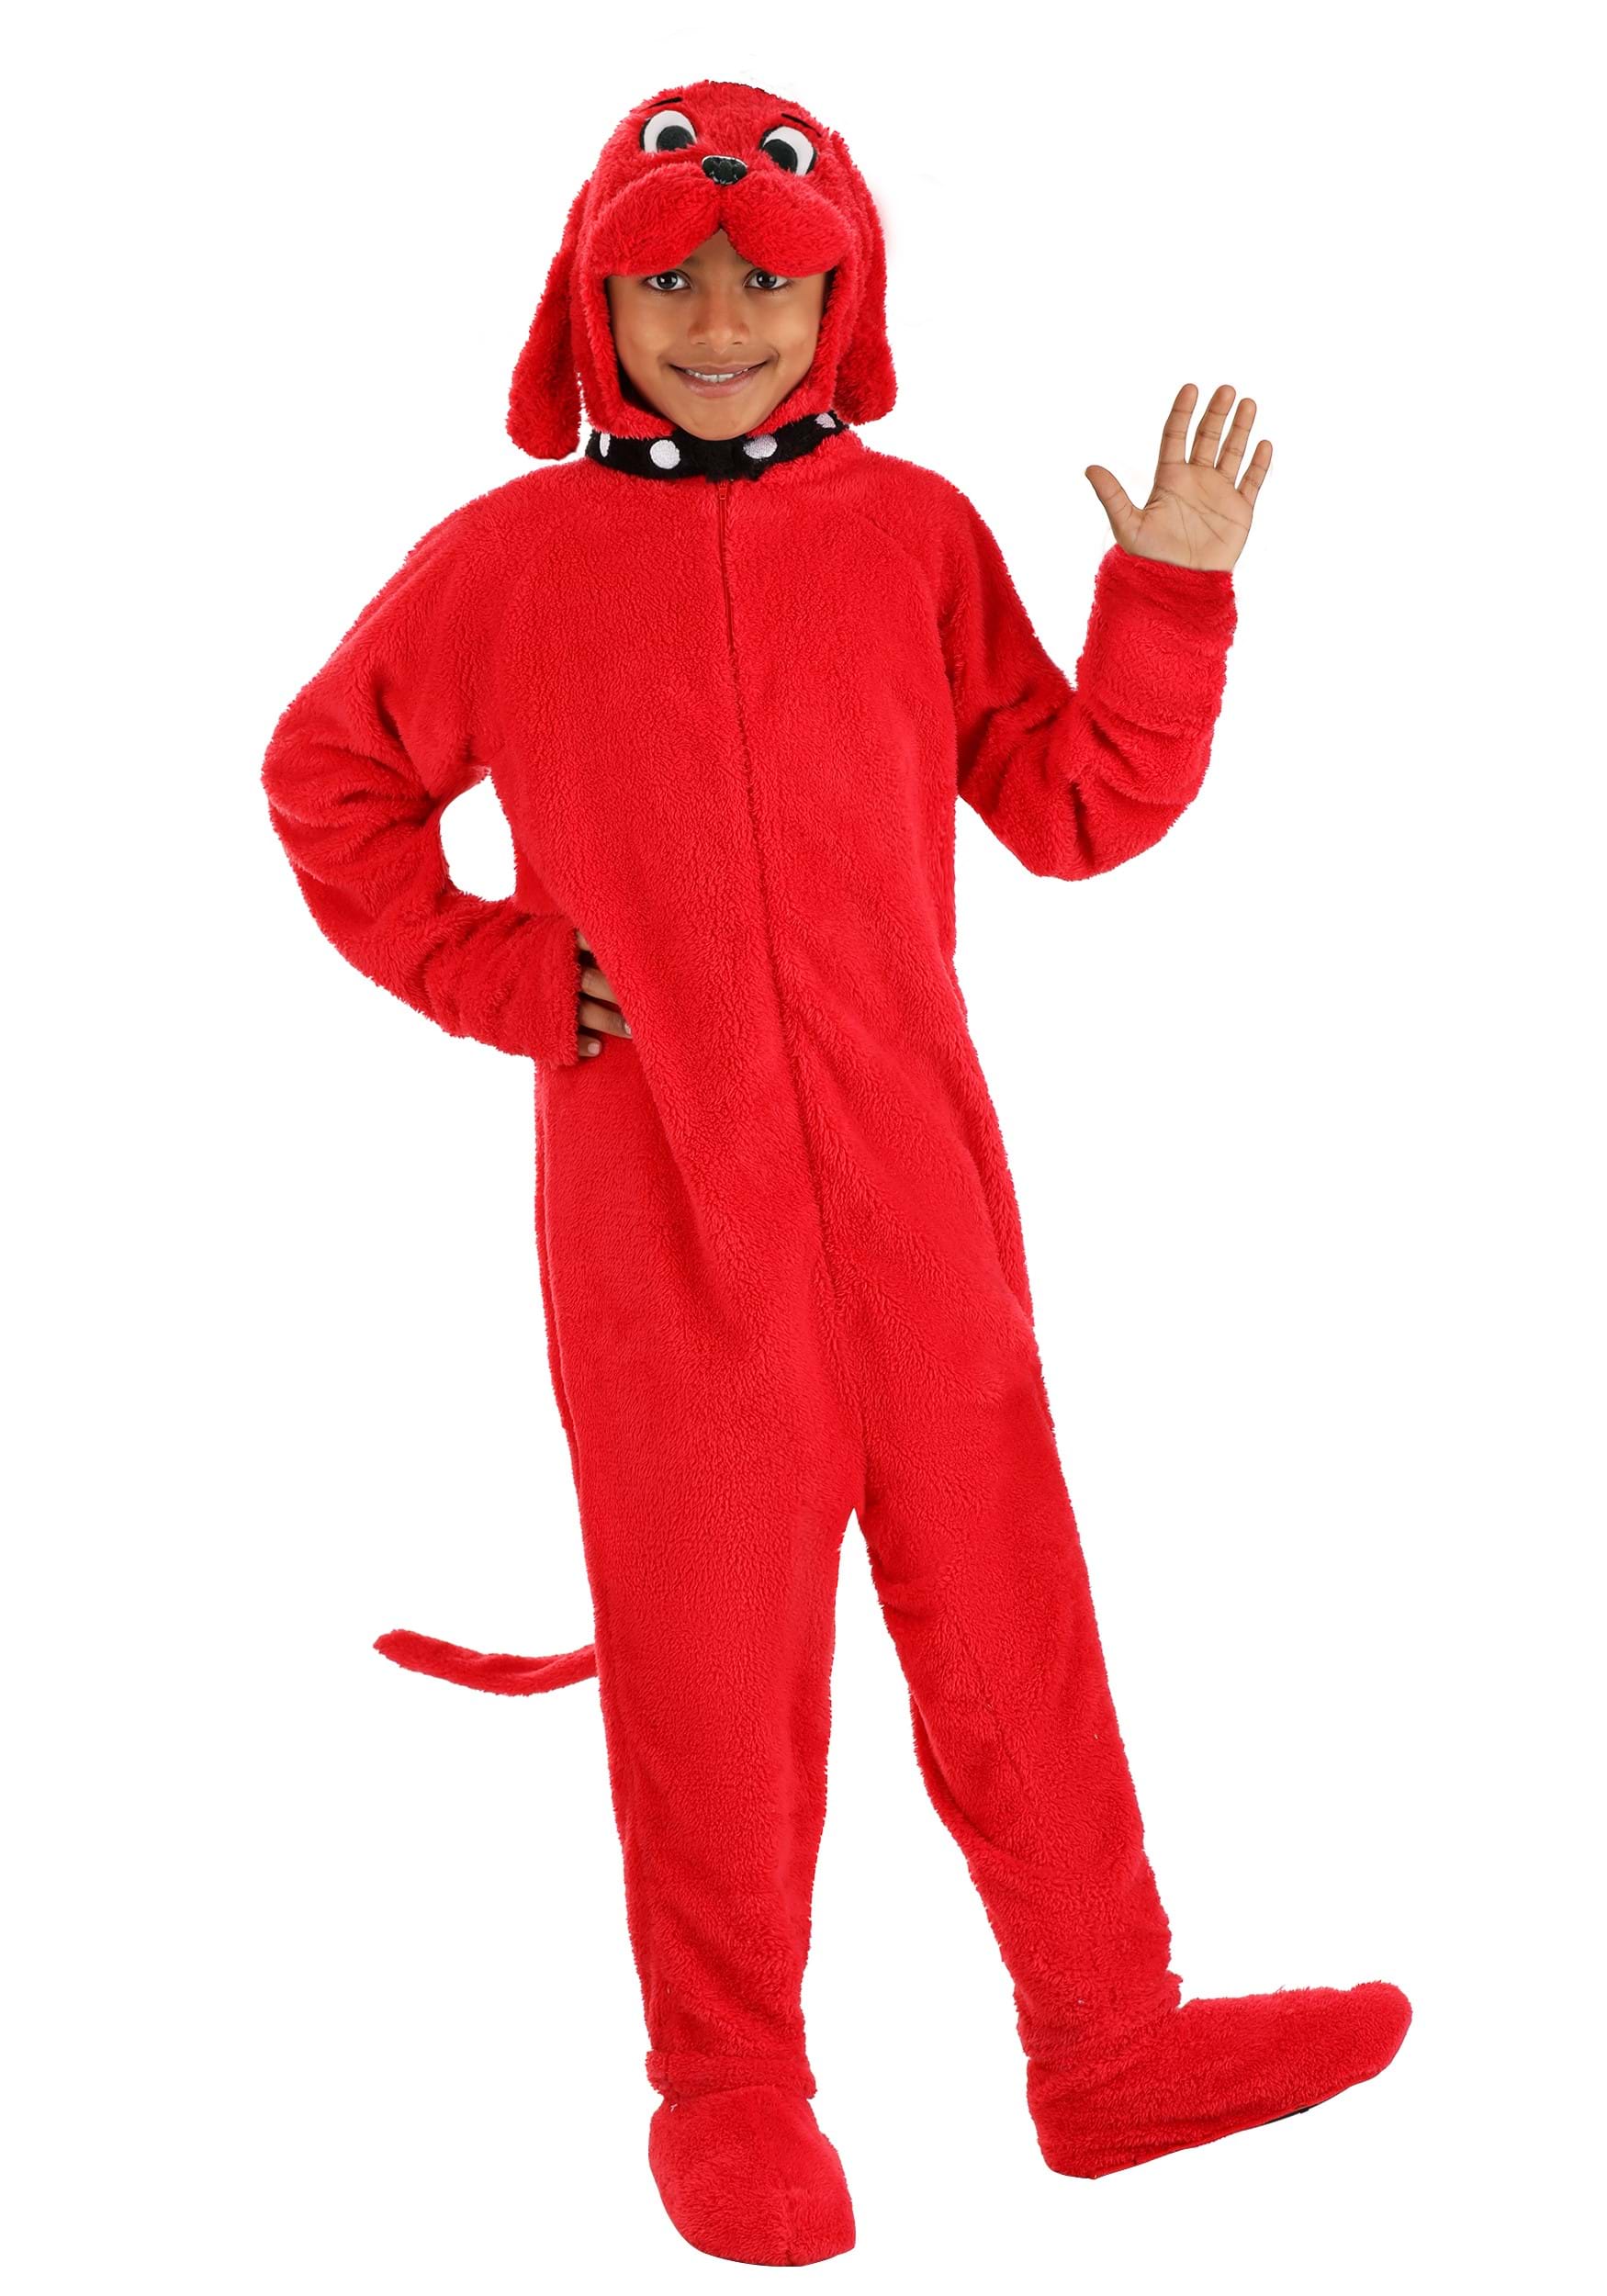 Clifford the Big Red Dog Size Costume | Kids Halloween Costume